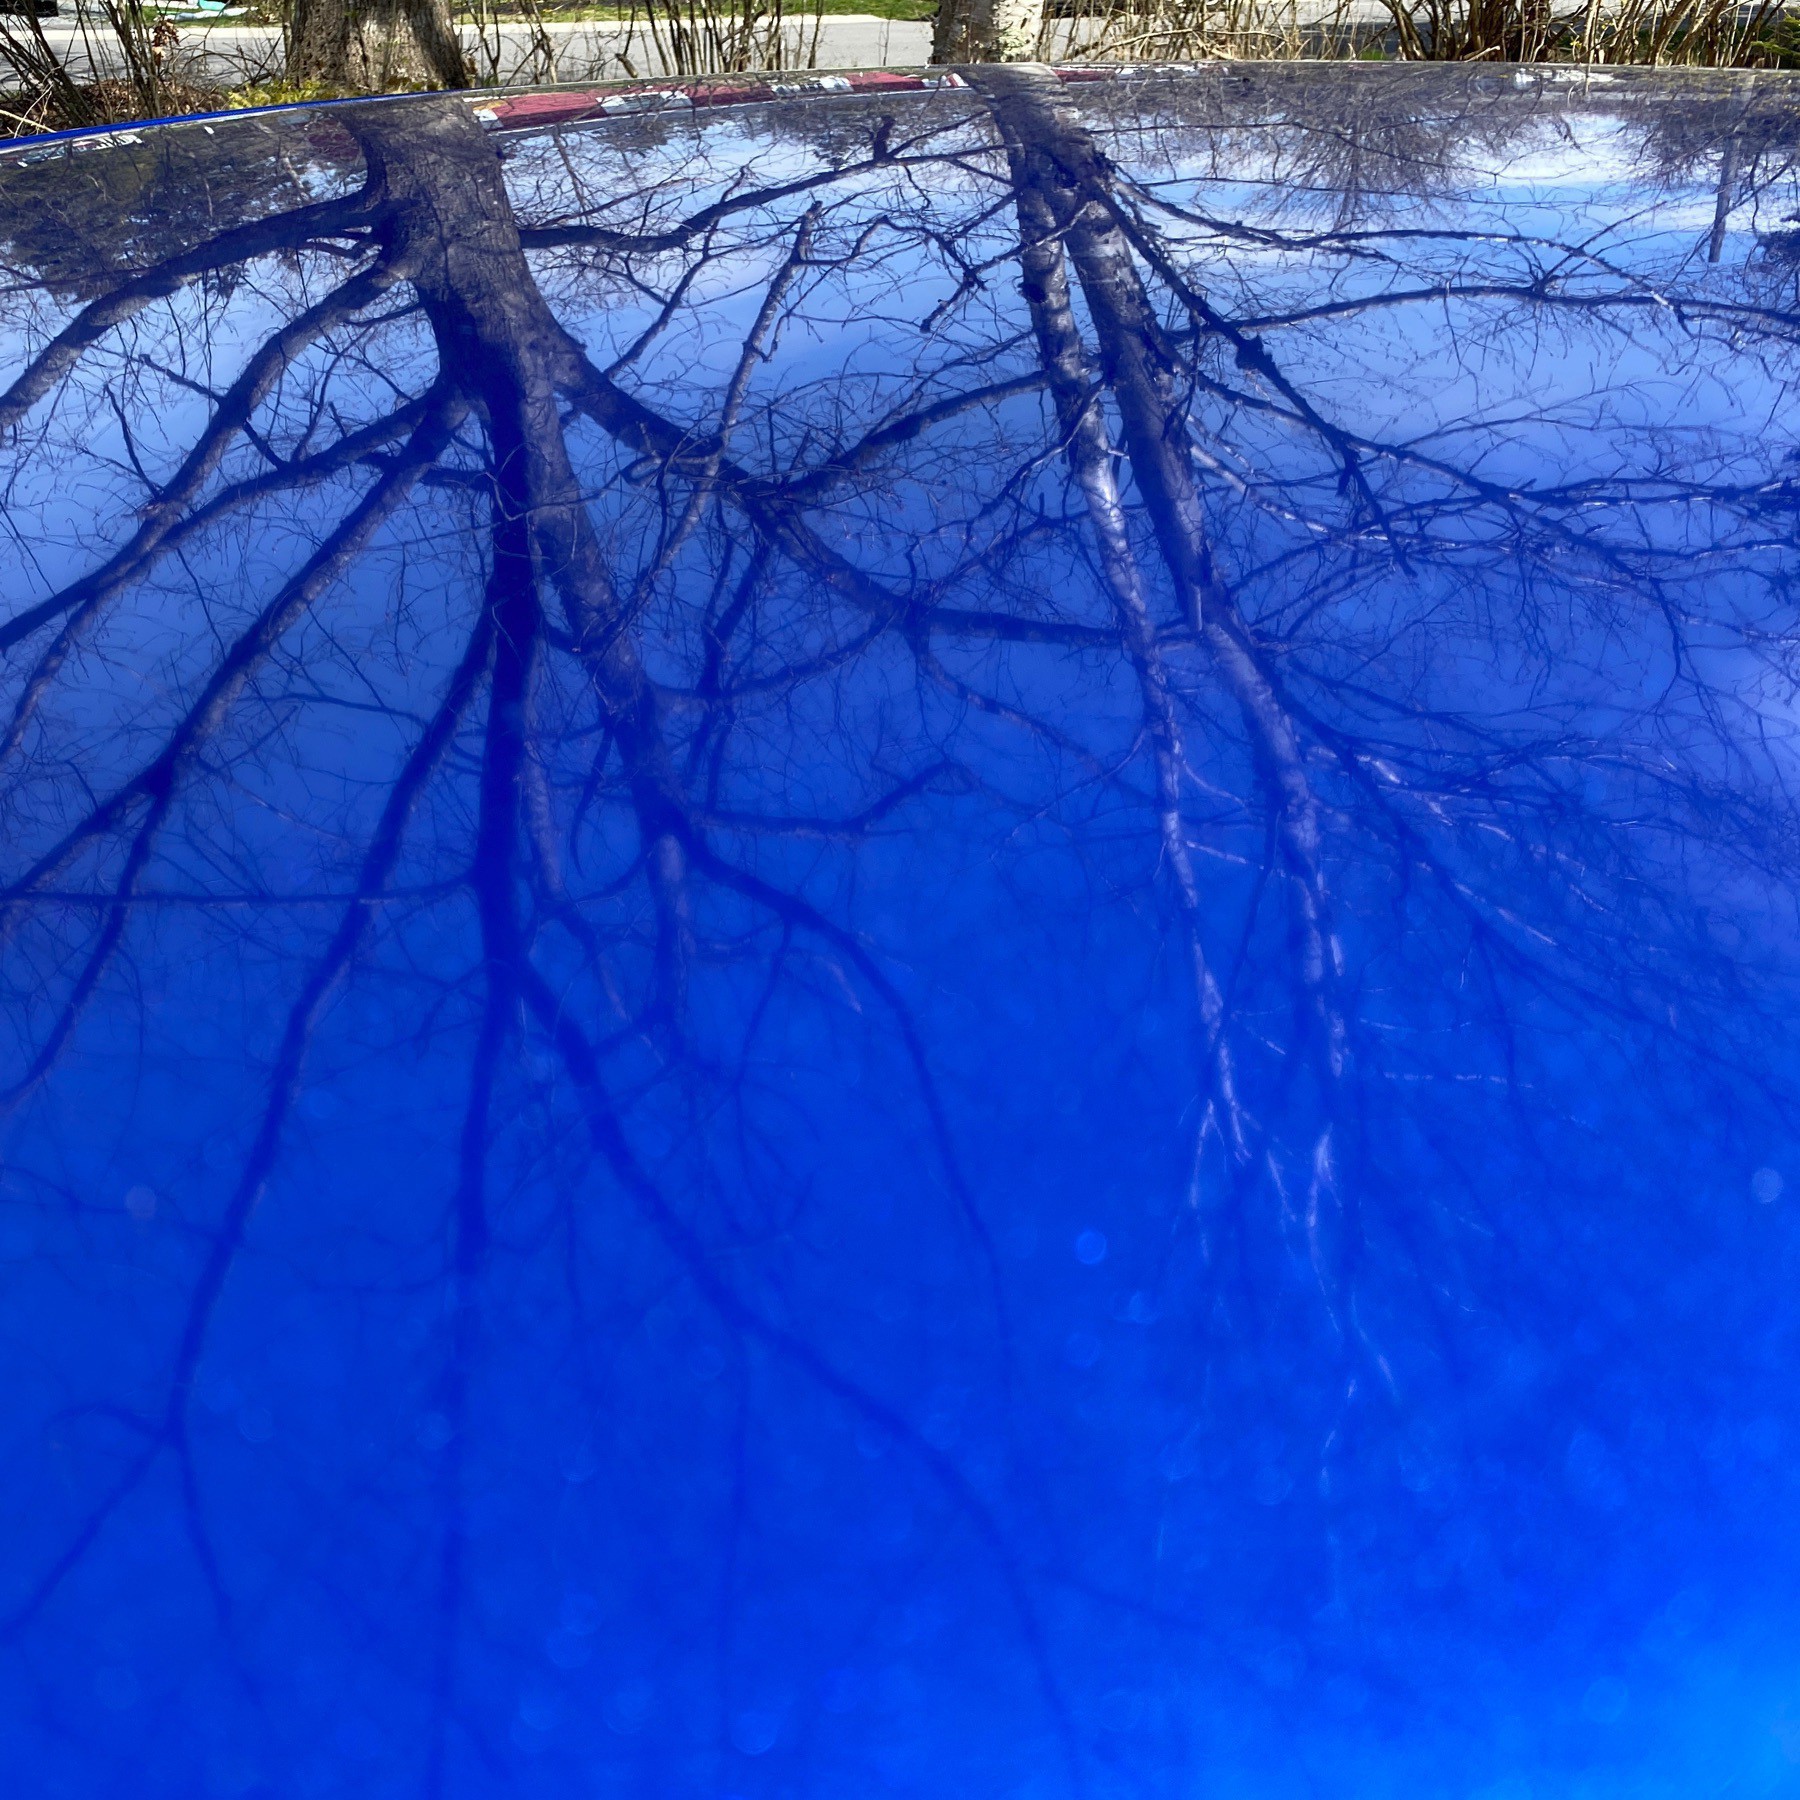 Blue car roof with trees reflected in it.